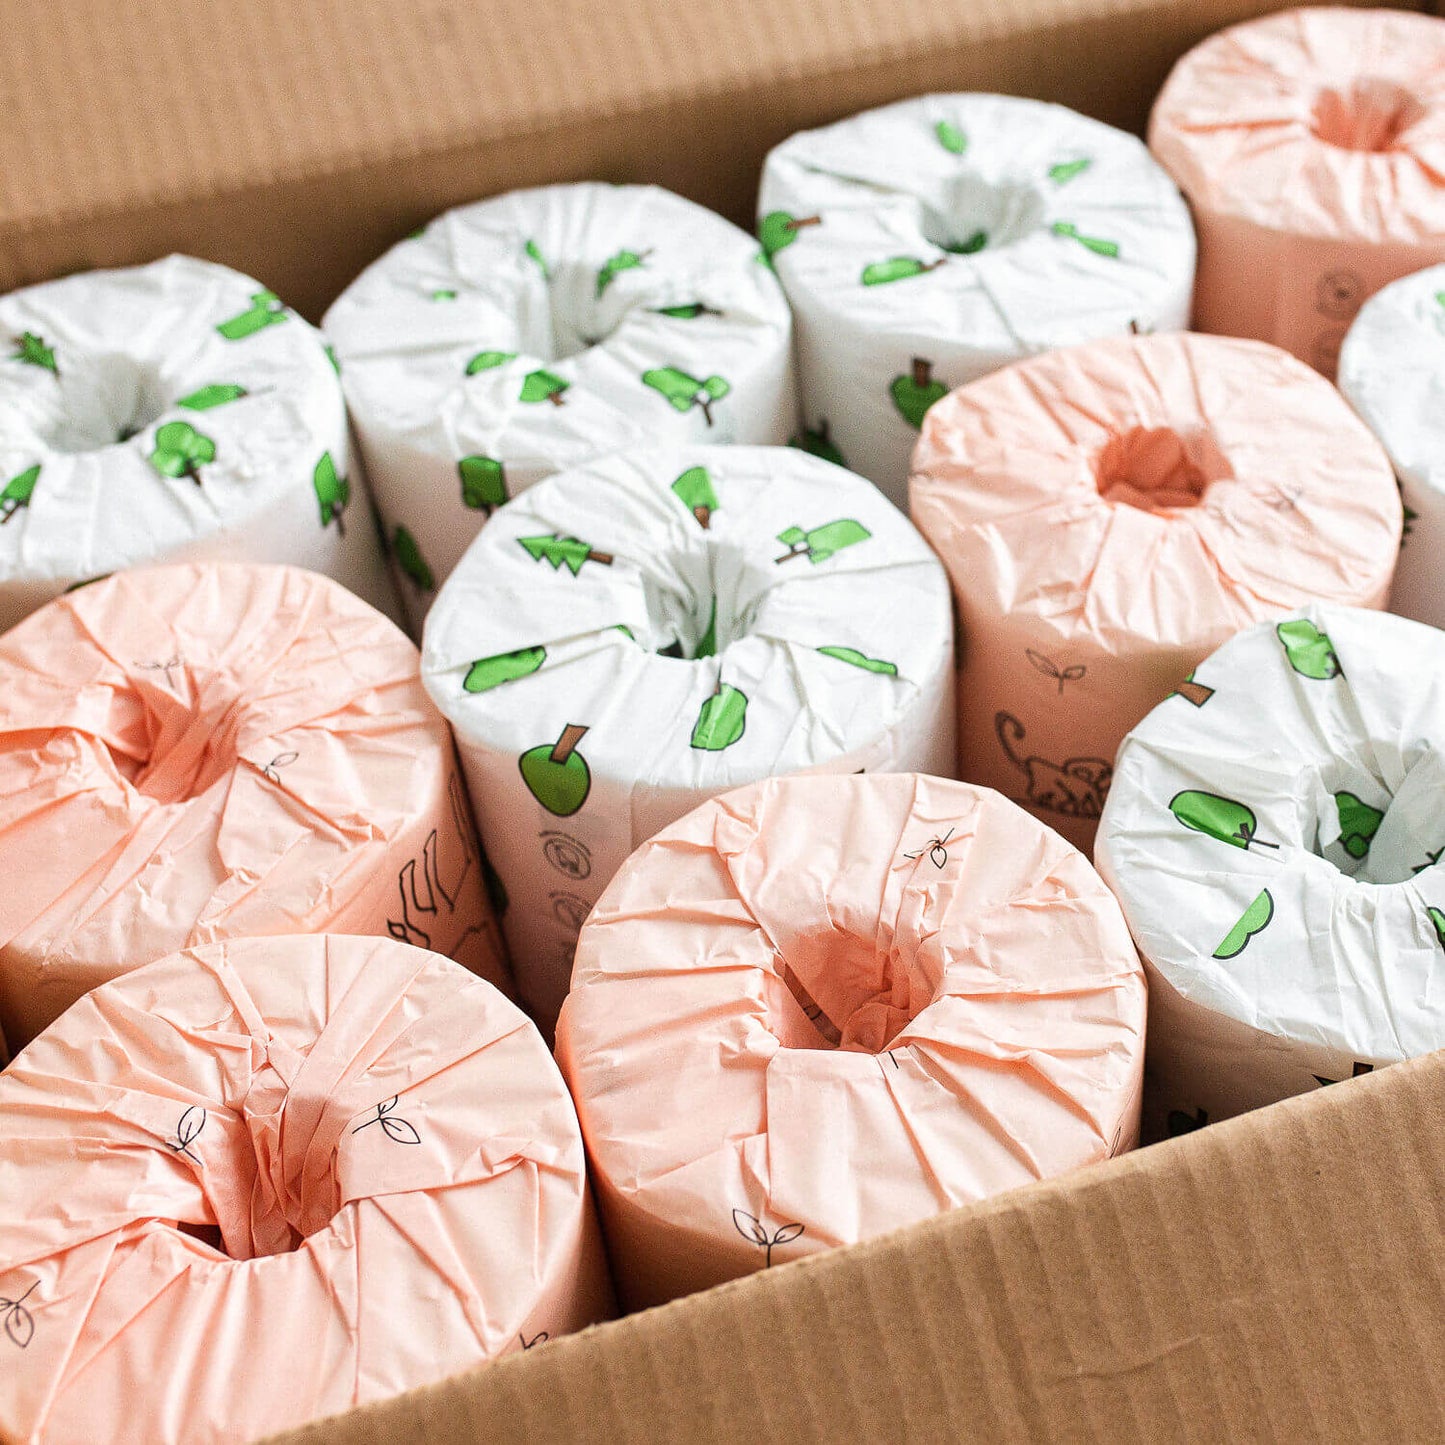 An opened carton box with rolls of individually paper wrapped eco toilet rolls showing. They are branded "the Rollieco"